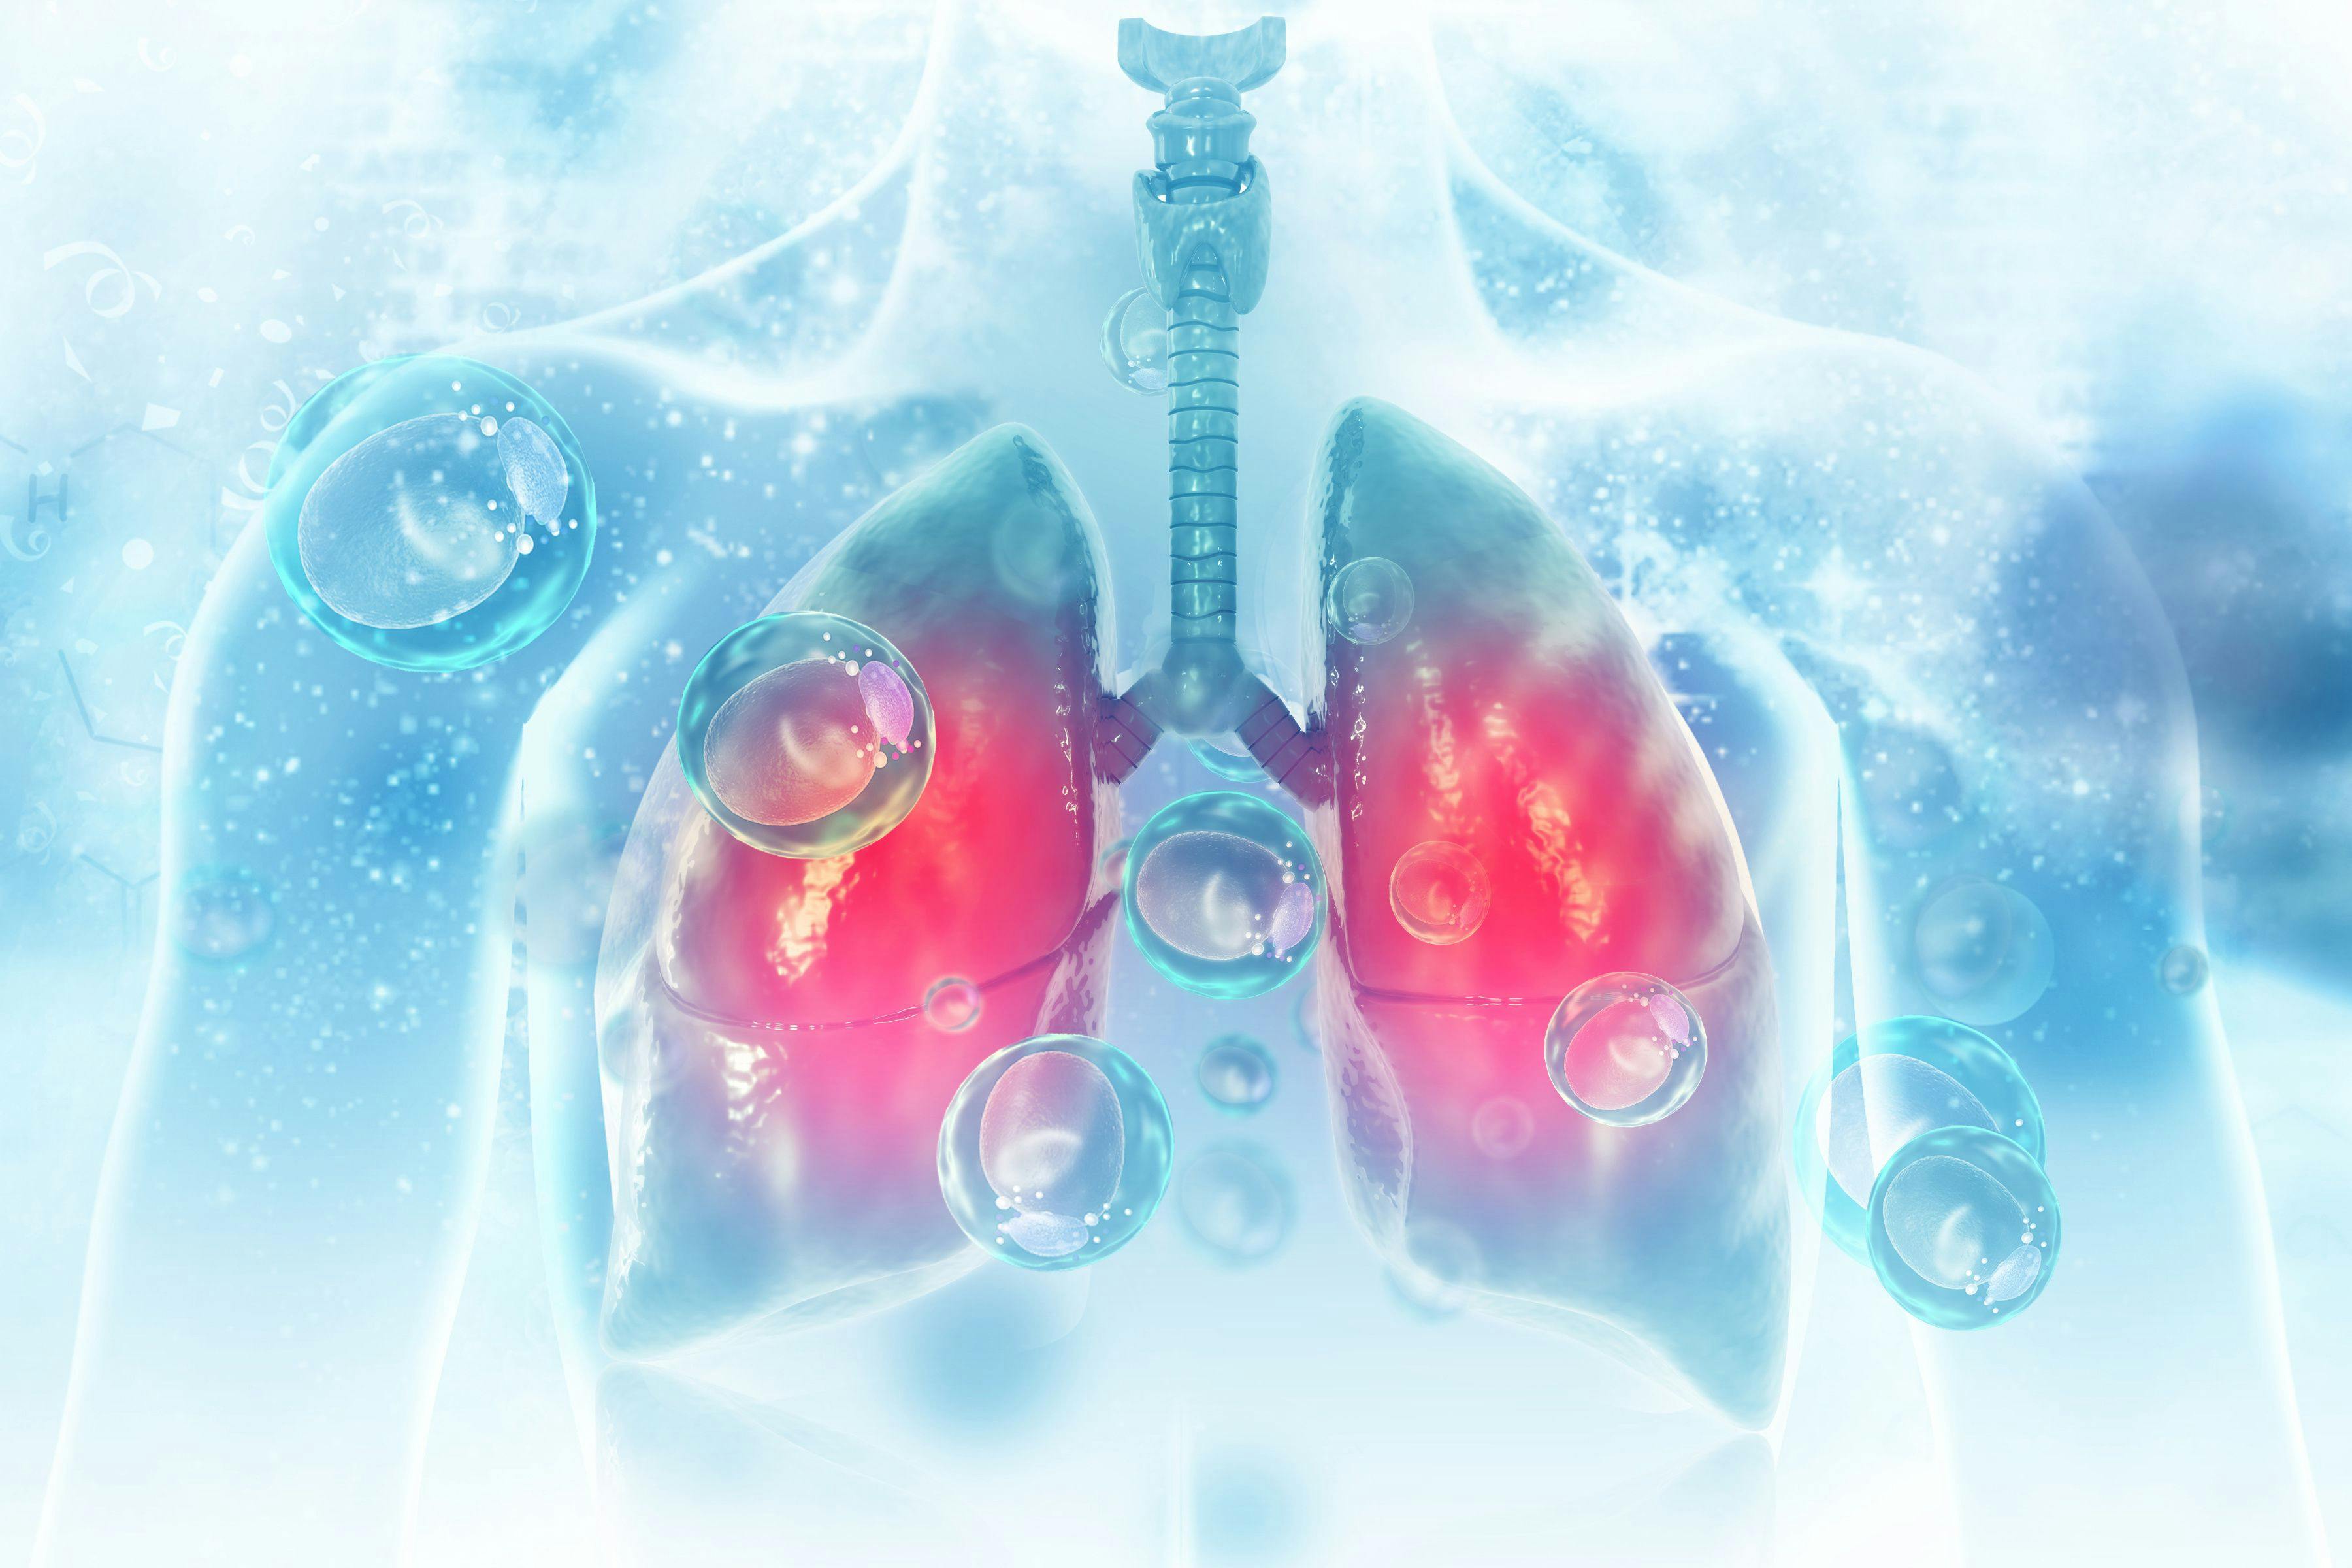 Virus and bacteria infected the Human lungs. lung disease | Image Credit: Crystal light - stock.adobe.com